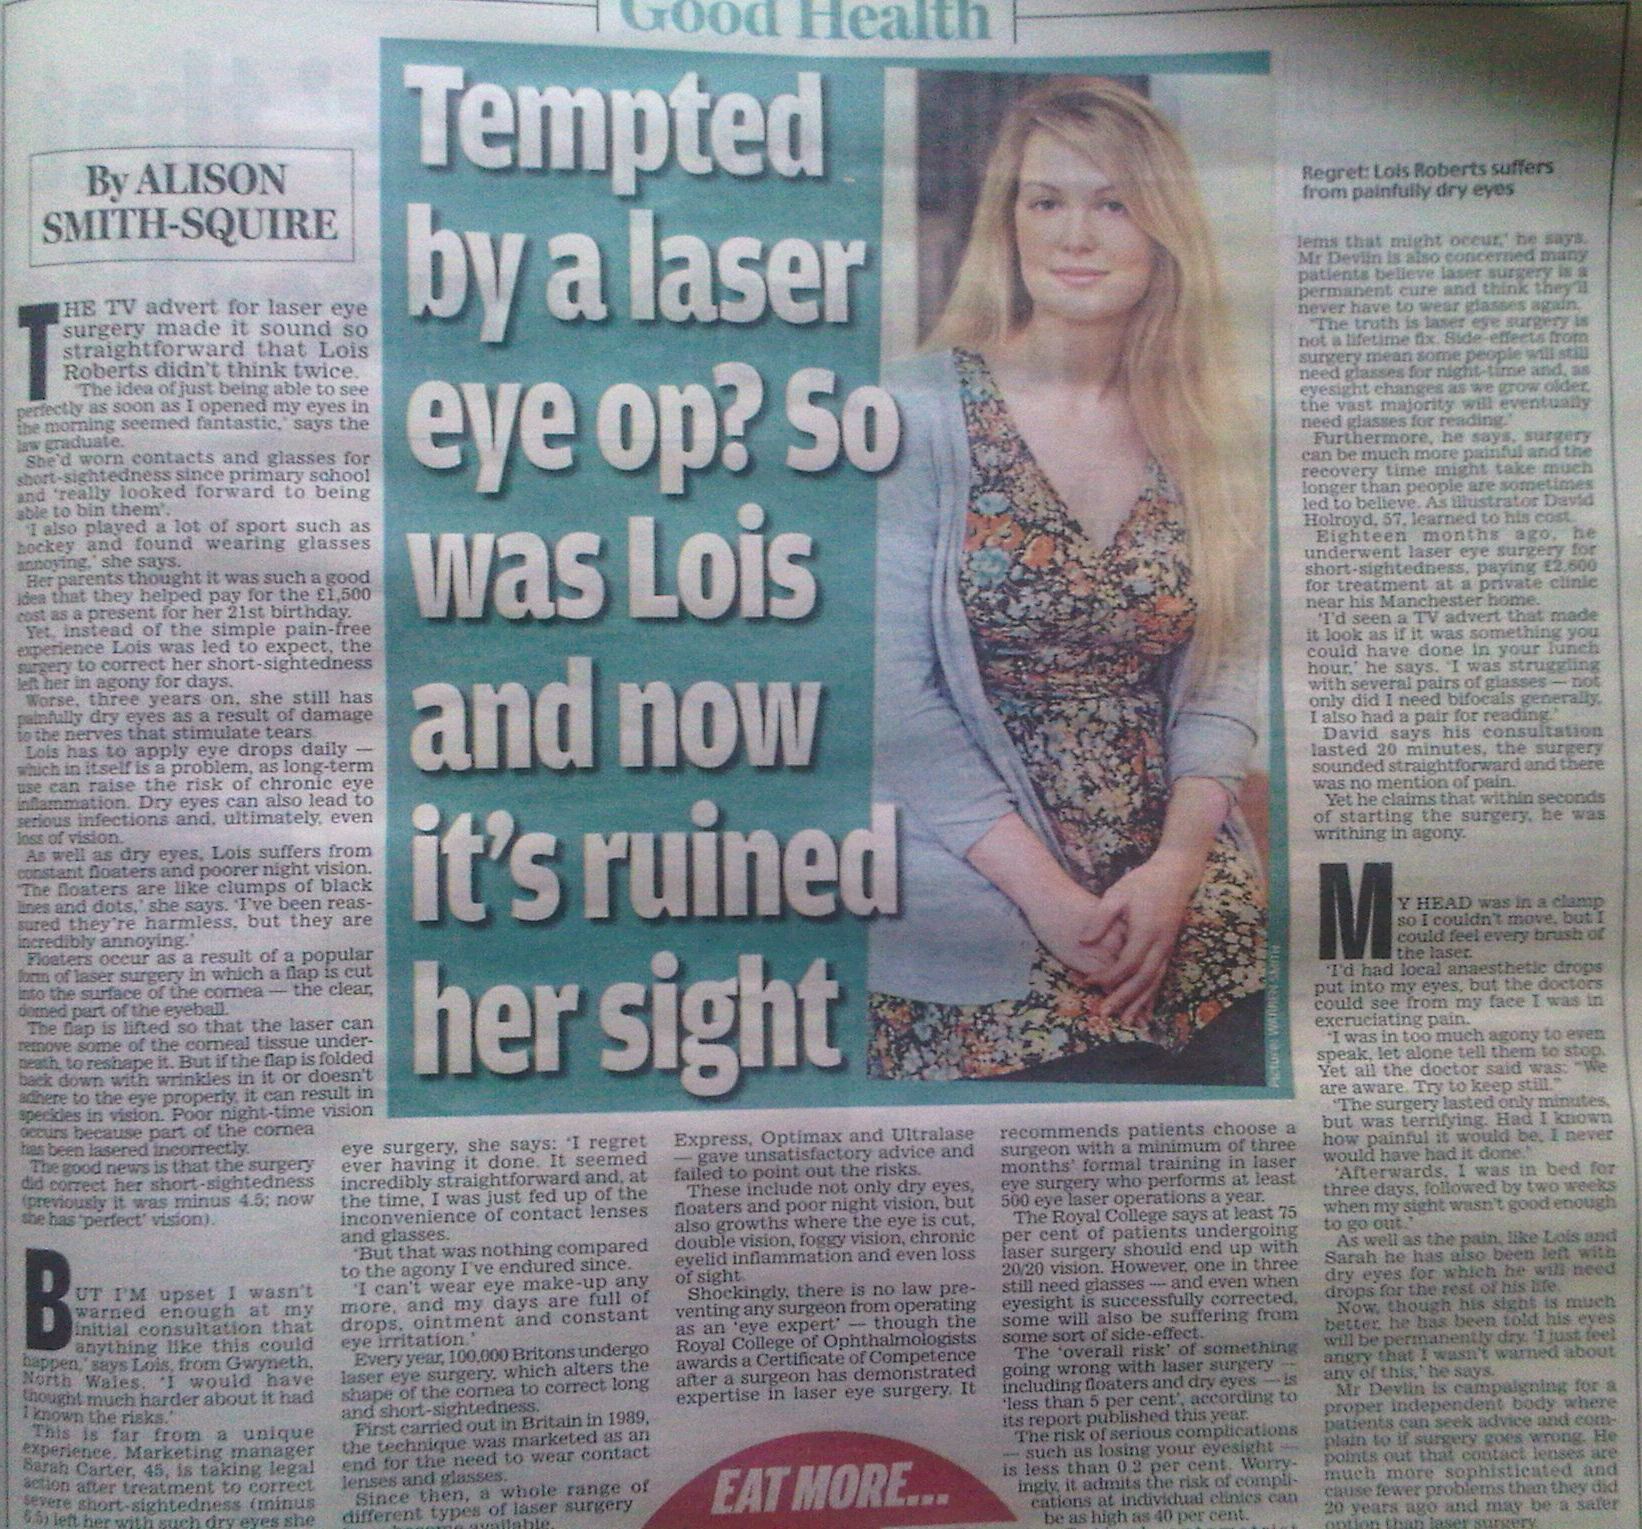 This article appeared in the Daily Mail's Good Health section.